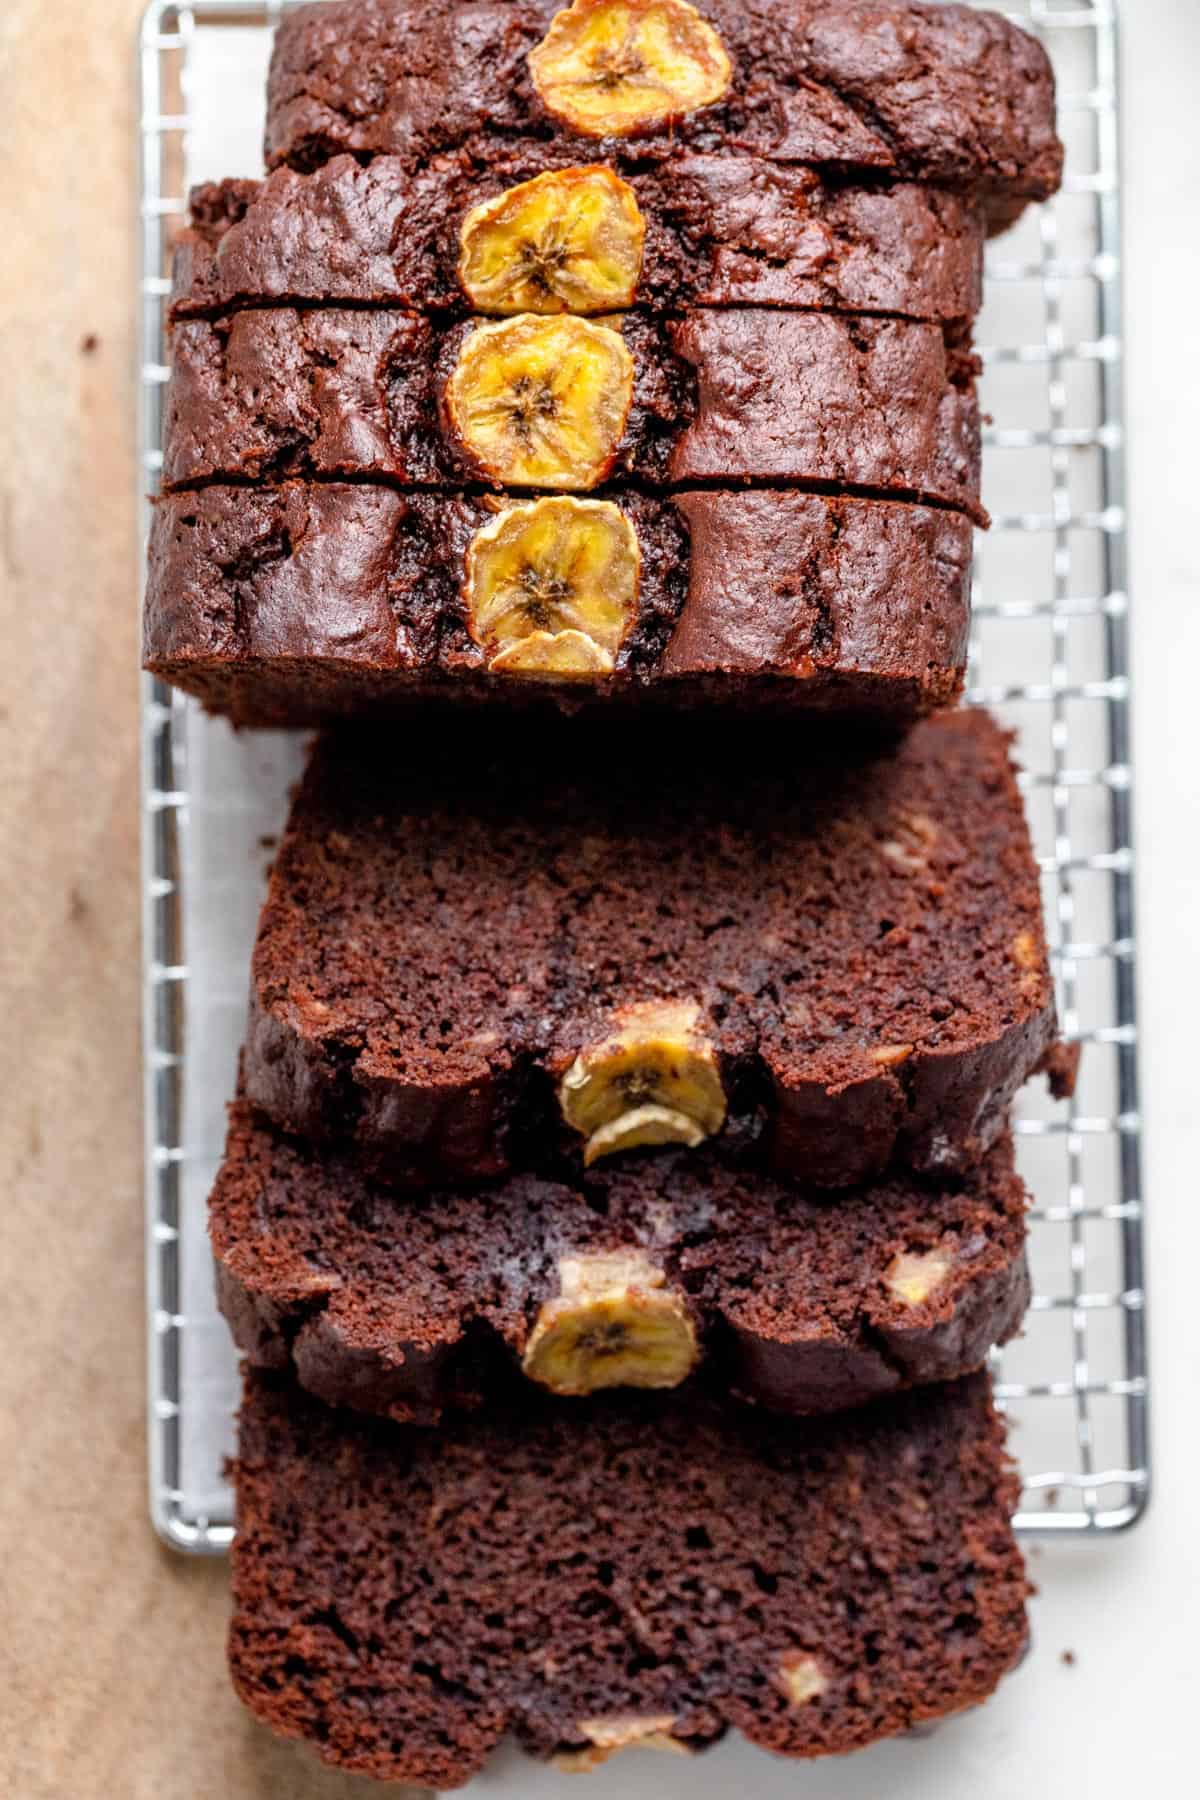 Chocolate Peanut Butter Banana Bread is an easy quick bread cut into slices on wire rack to show the consistency